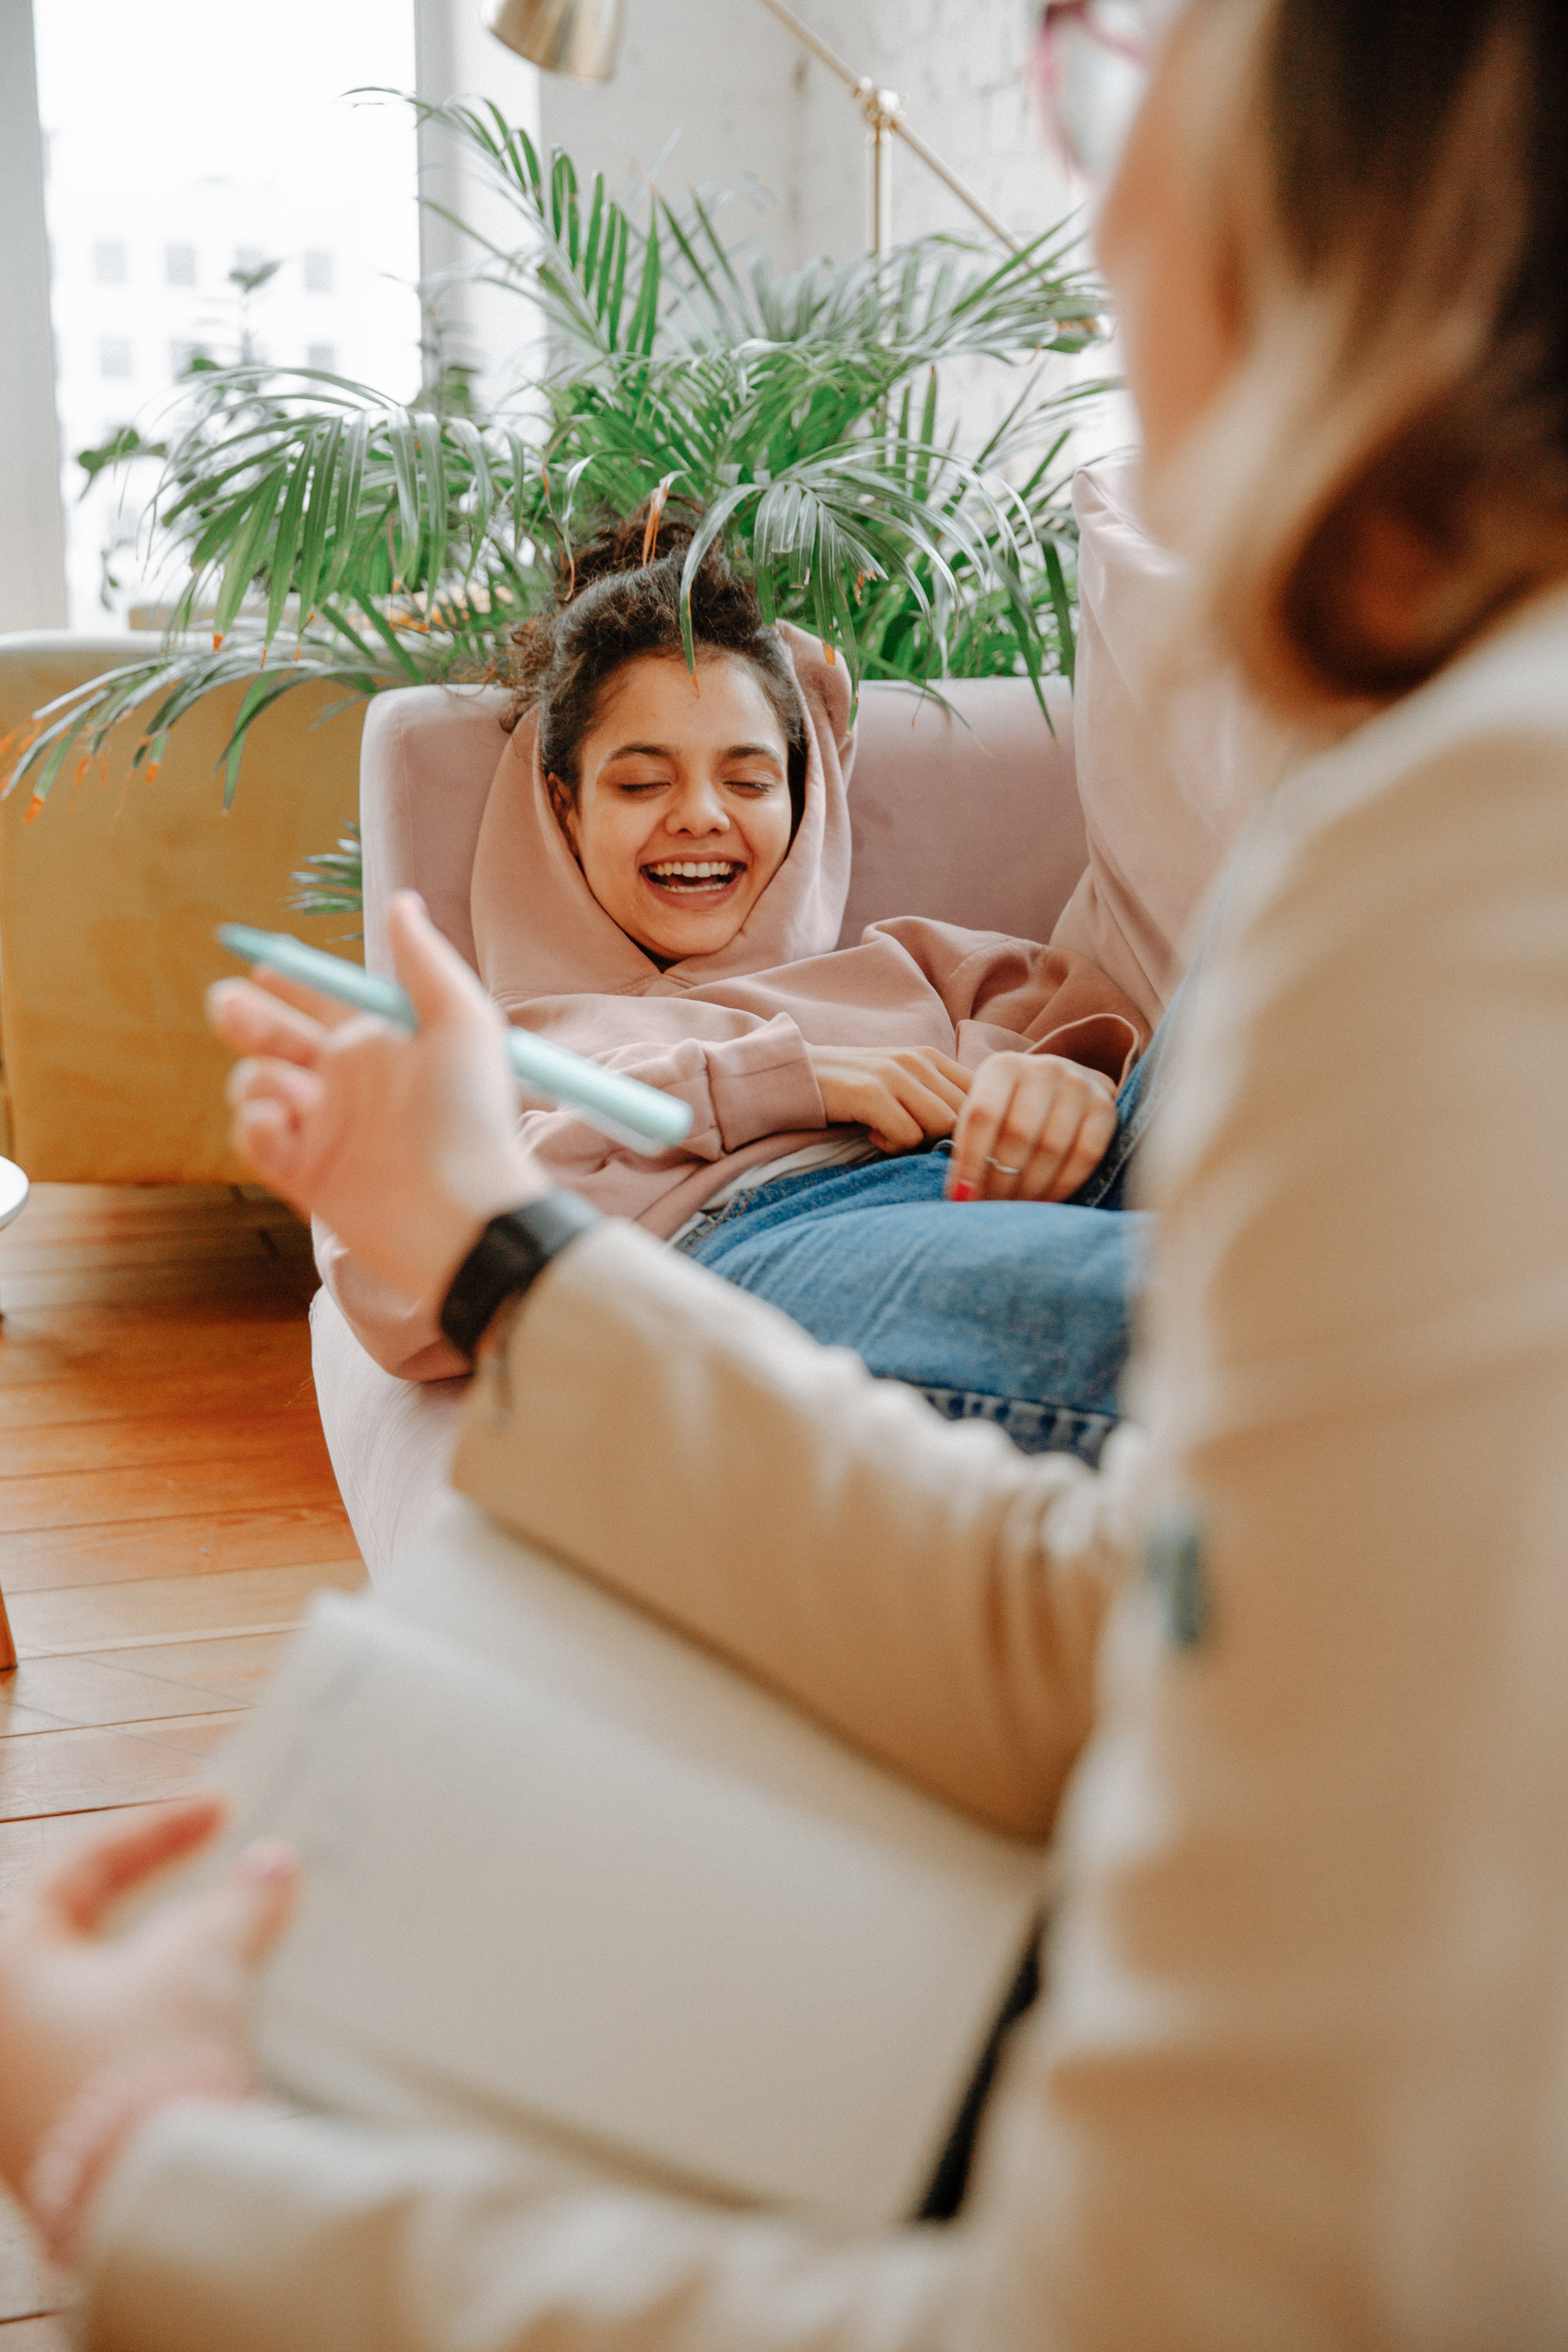 A woman laughing on the couch. | Source: Pexels